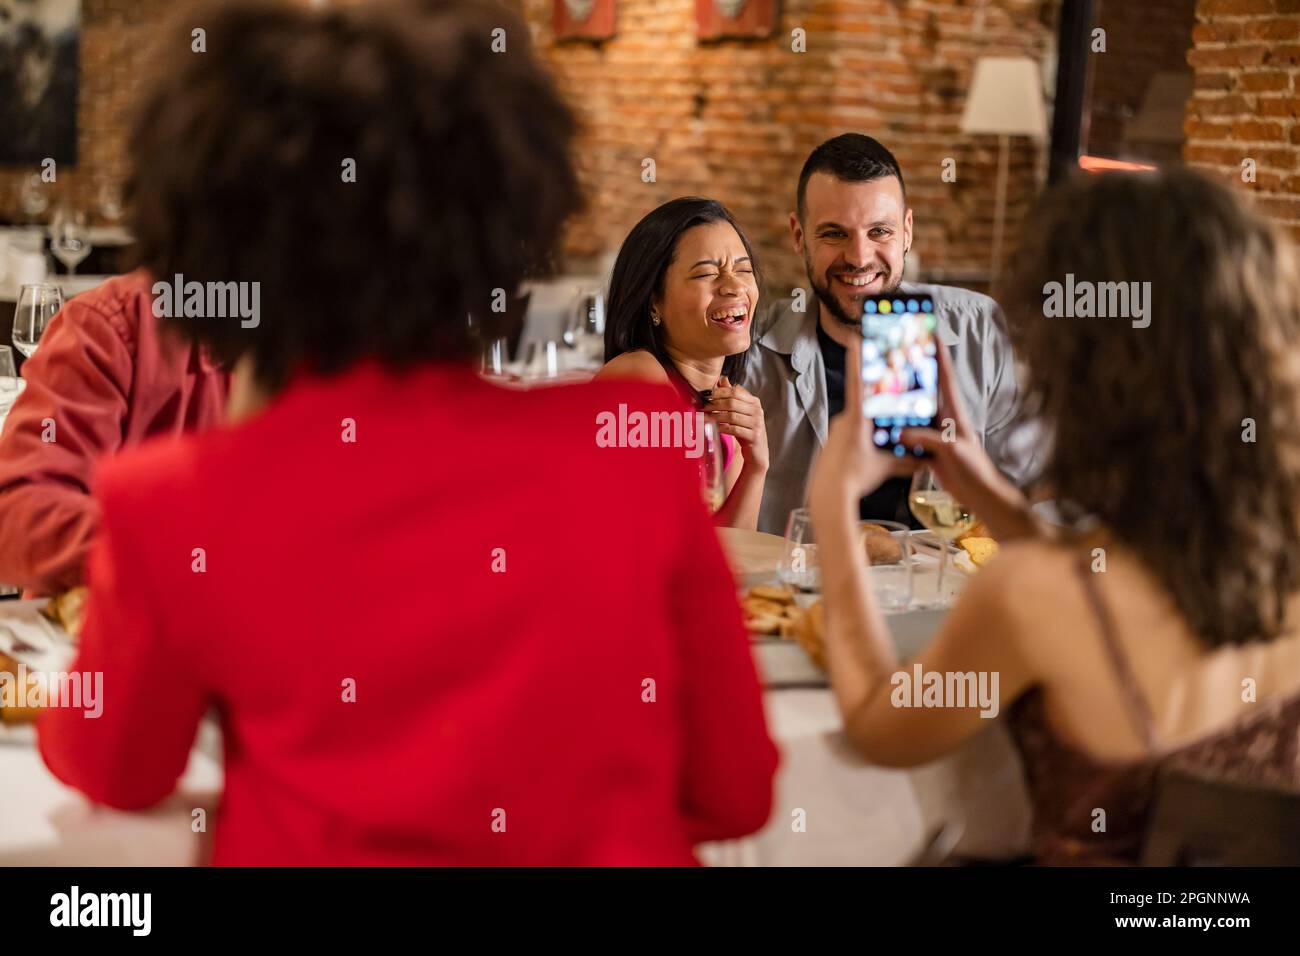 Woman capturing image of friends through smart phone Stock Photo